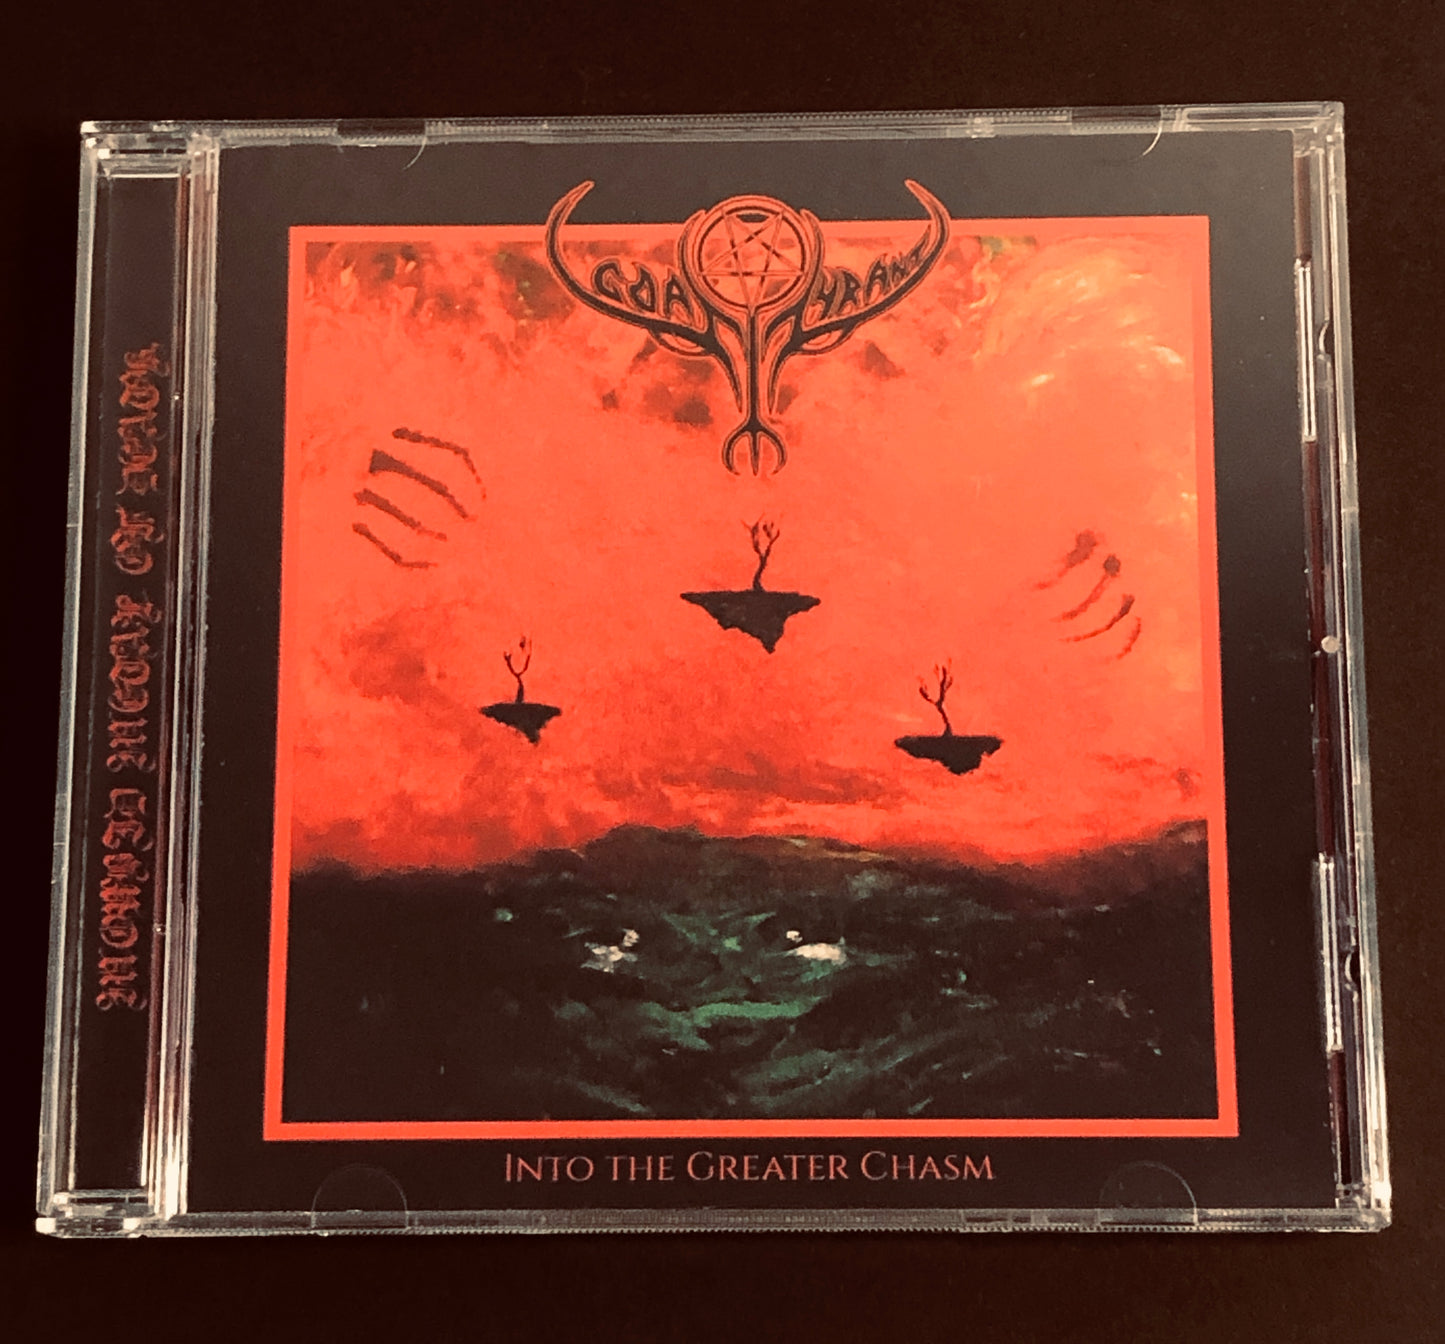 GOAT TYRANT (PL) "Into the Greater Chasm" - CDs